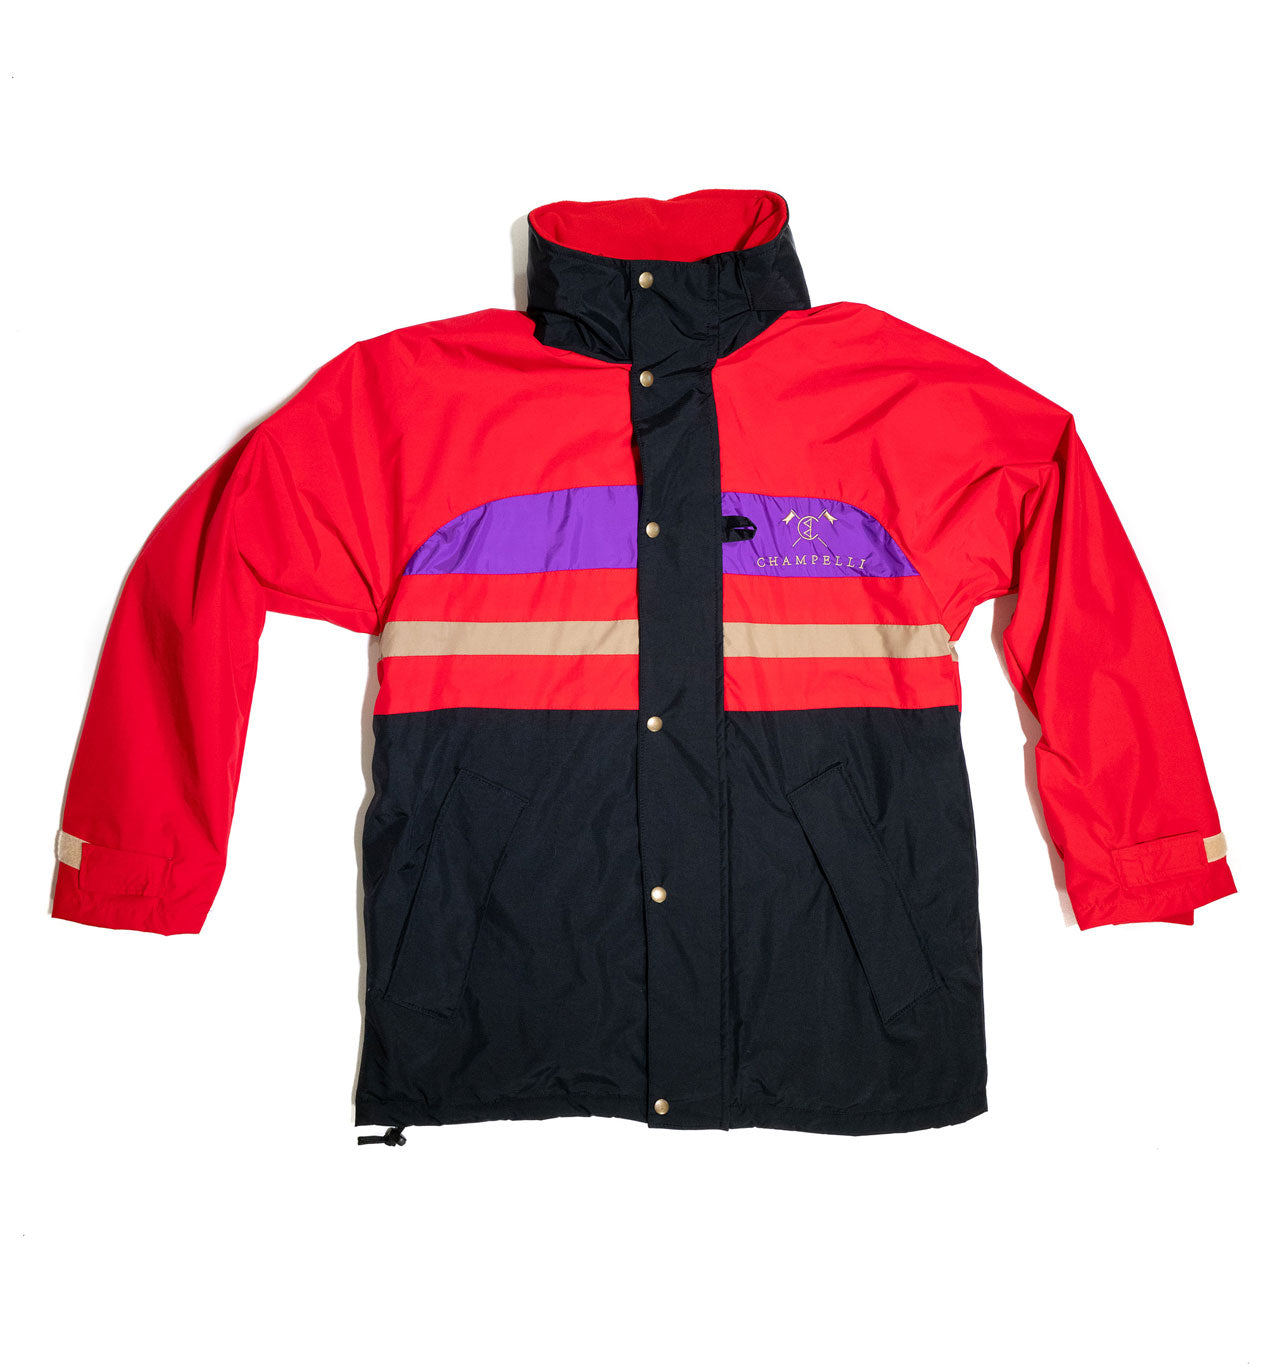 NAUTICAL JACKET IN RED